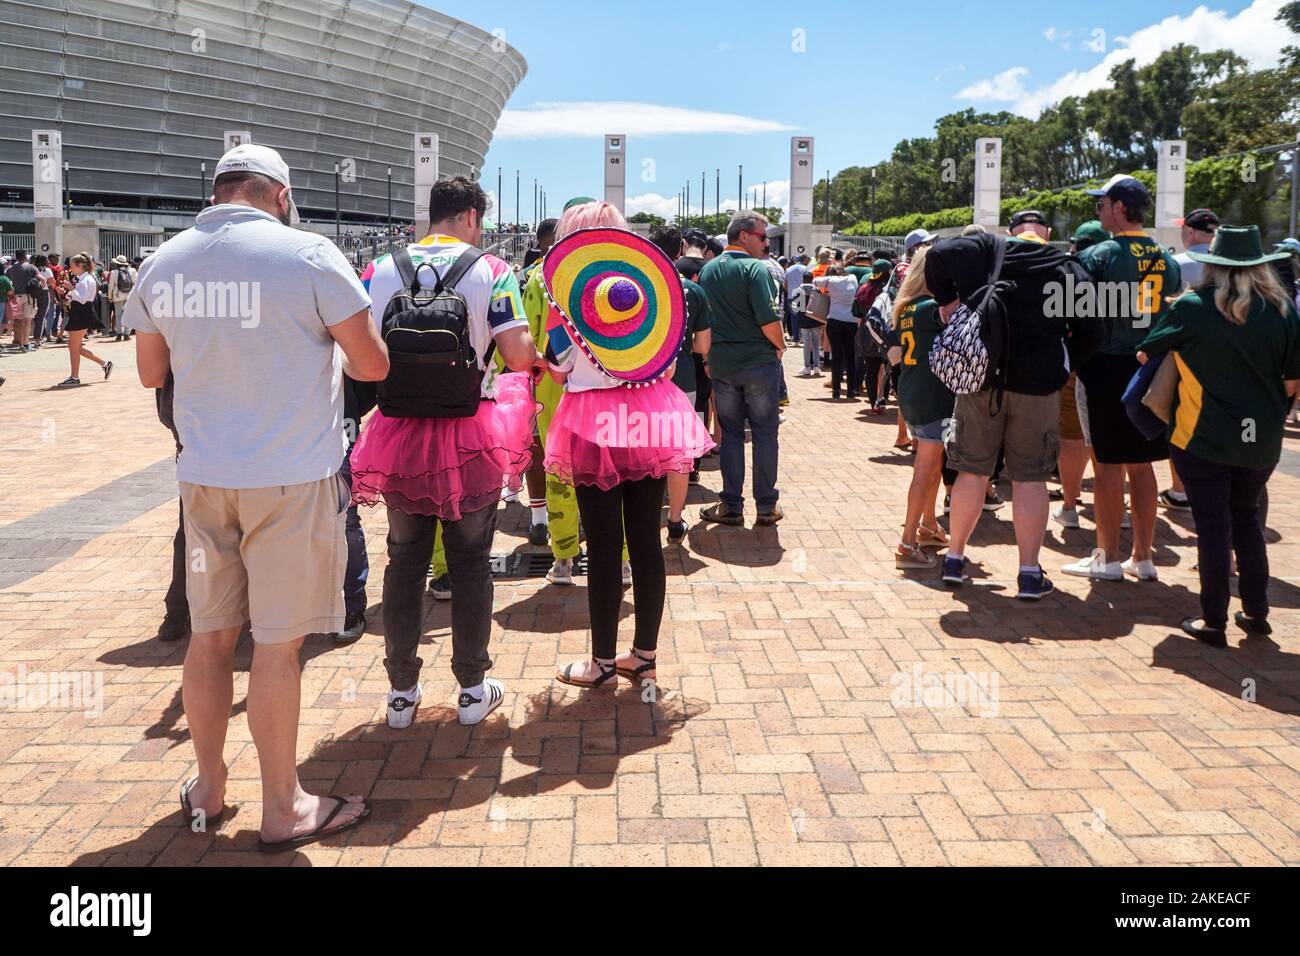 people dressed in fancy dress costumes stand in line and queue to get into the Cape Town stadium for rugby sevens tournament in South Africa Stock Photo